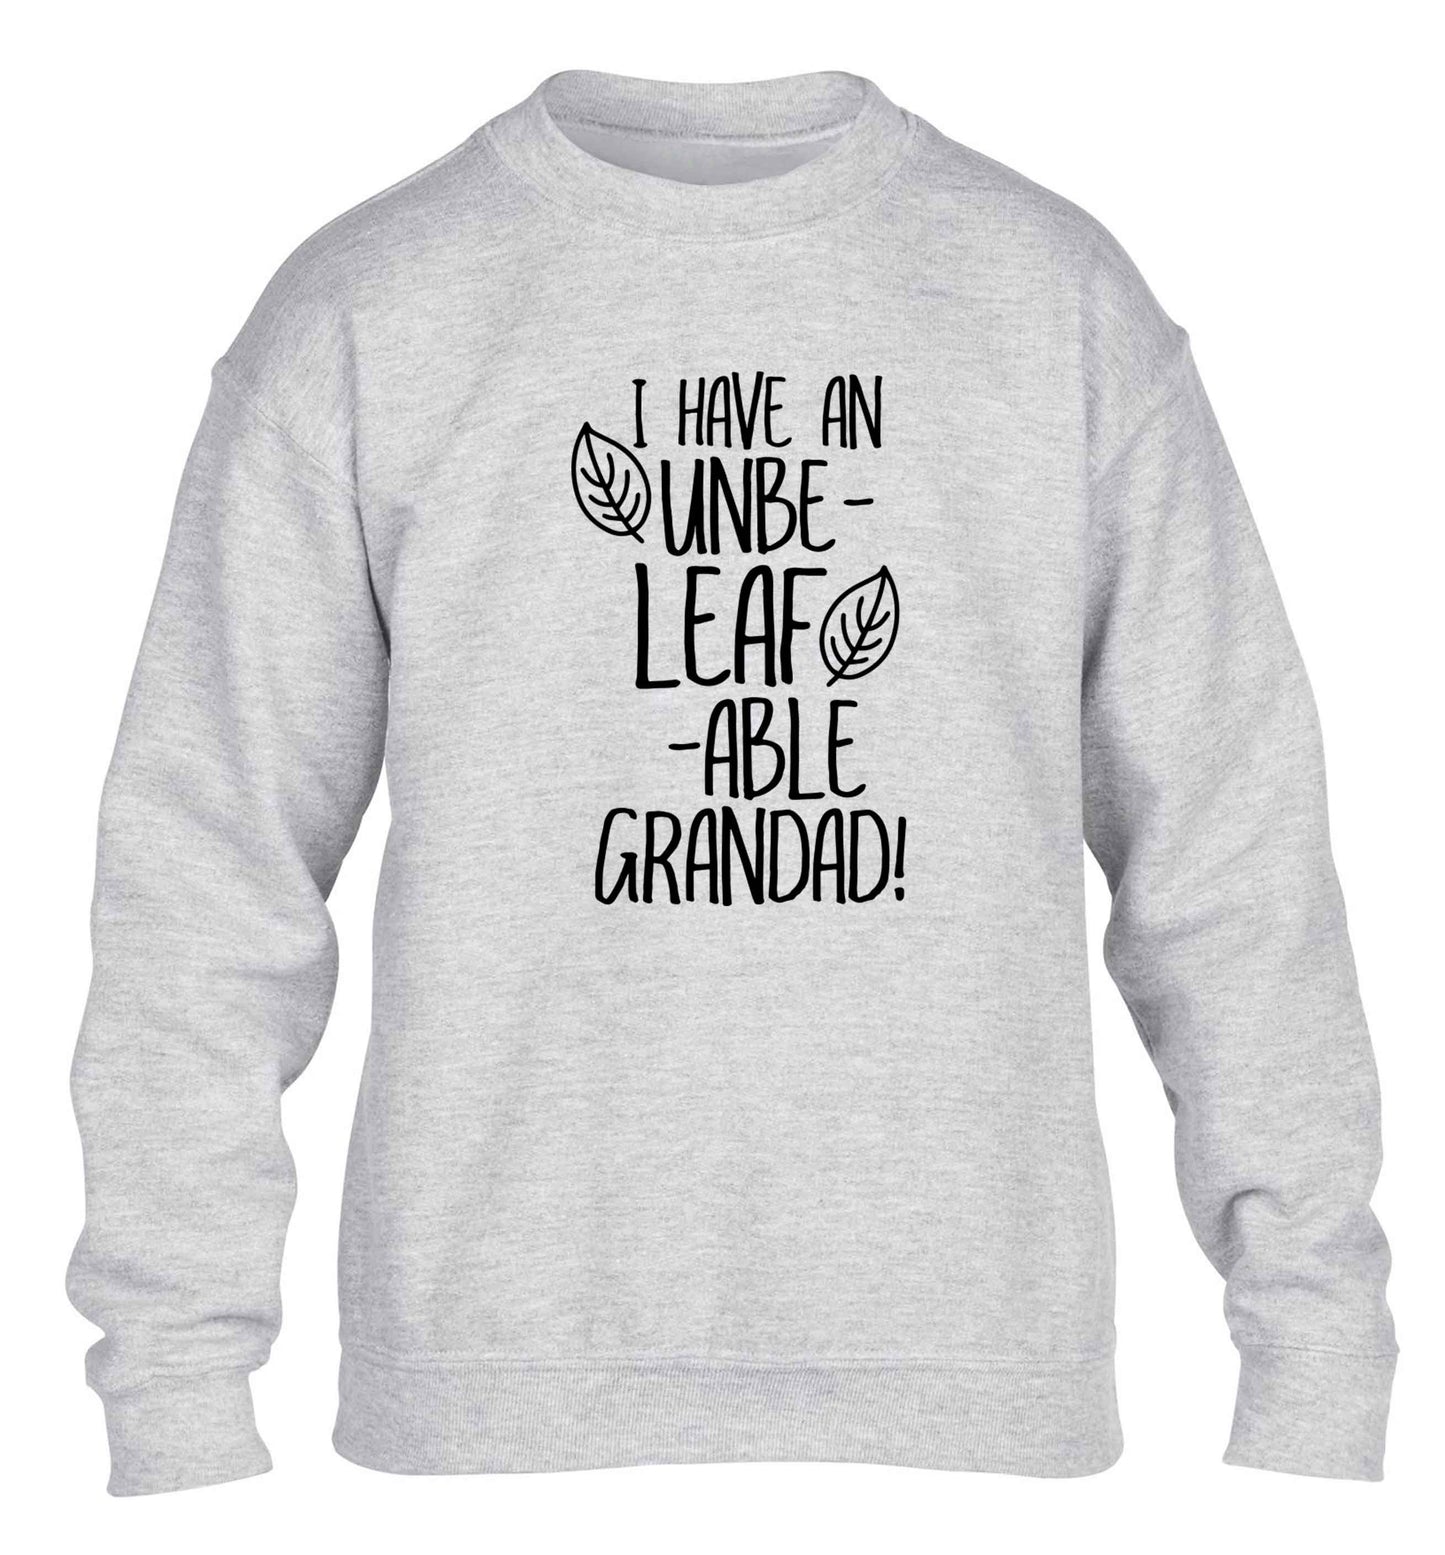 I have an unbe-leaf-able grandad children's grey sweater 12-13 Years